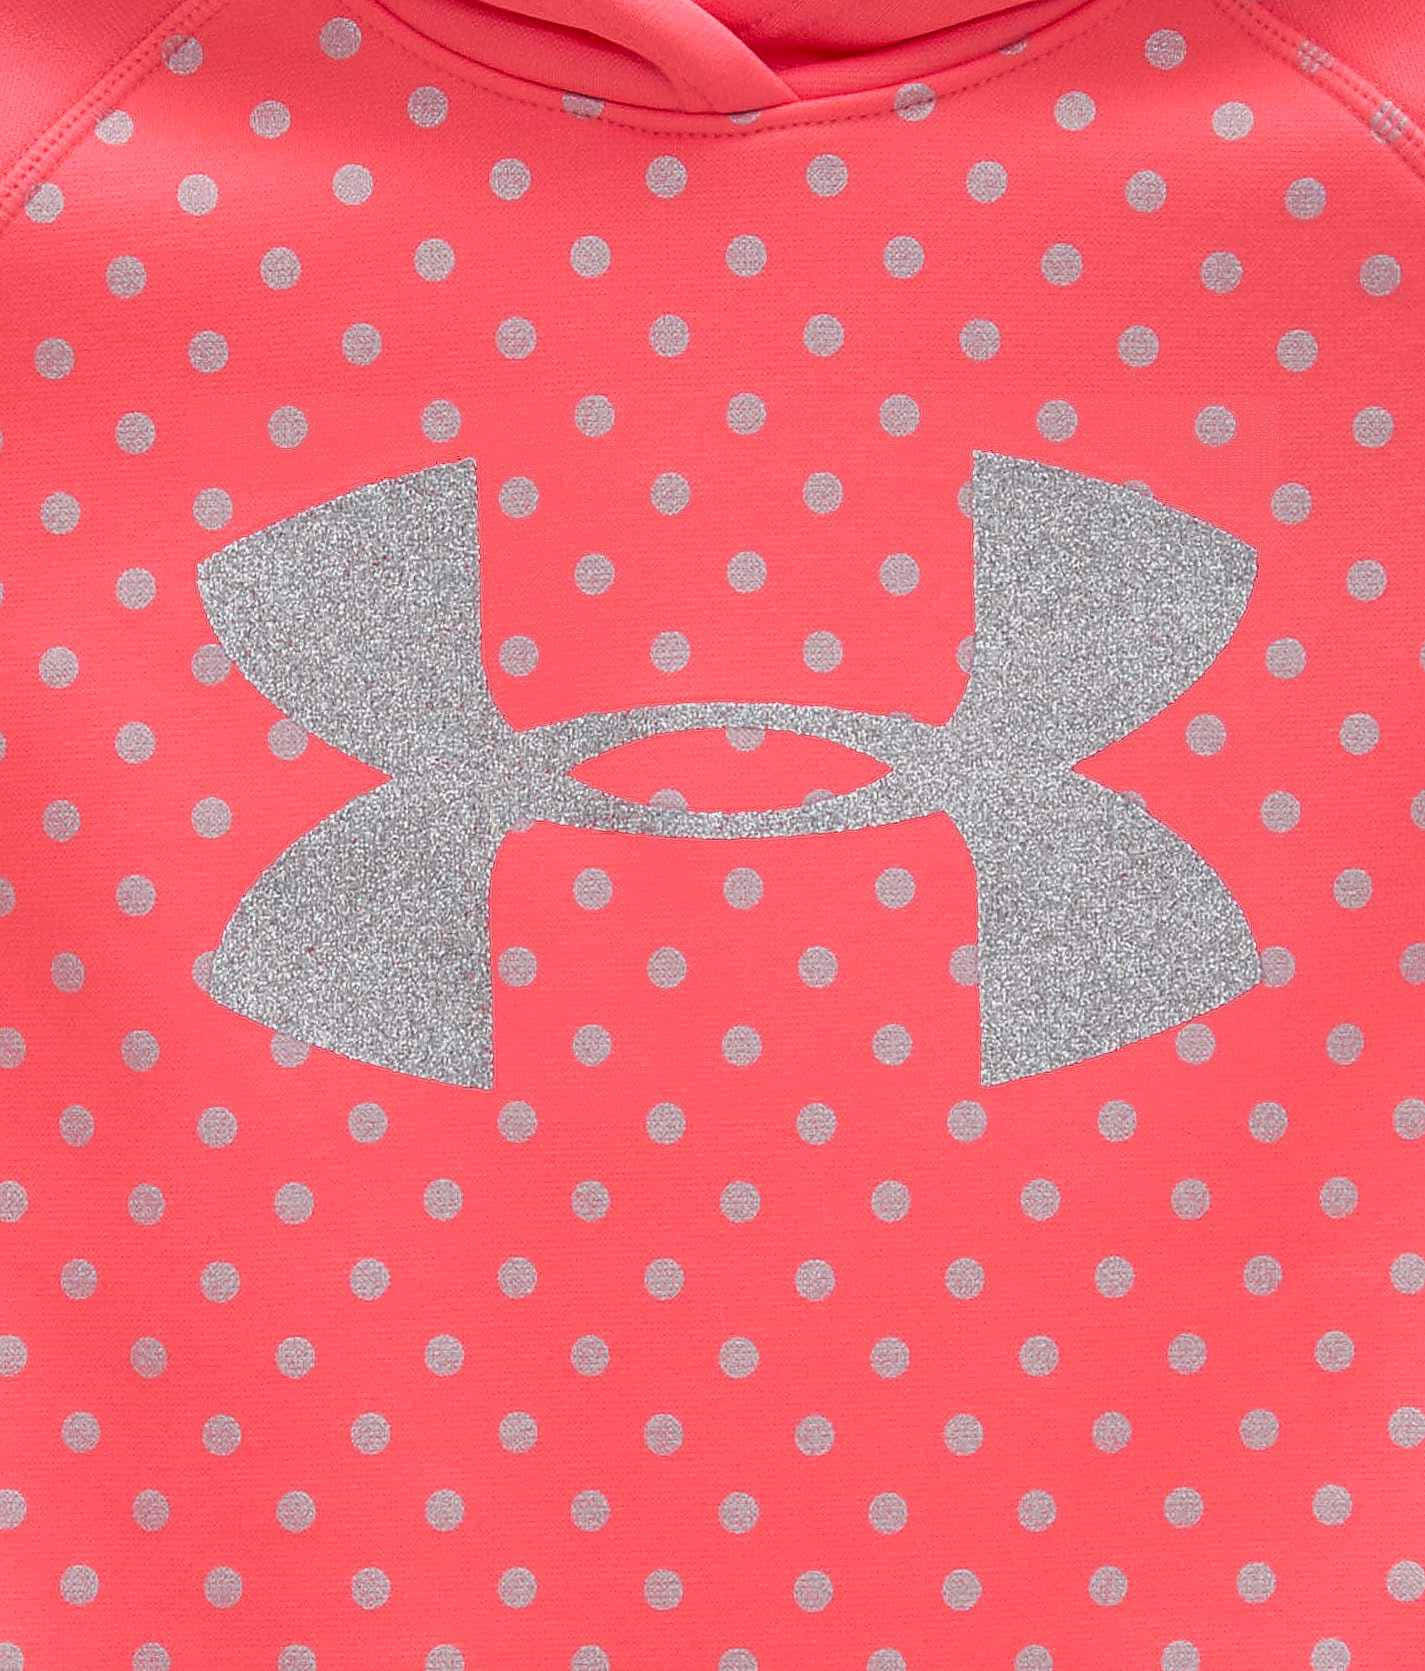 Download Under Armour Background | Wallpapers.com